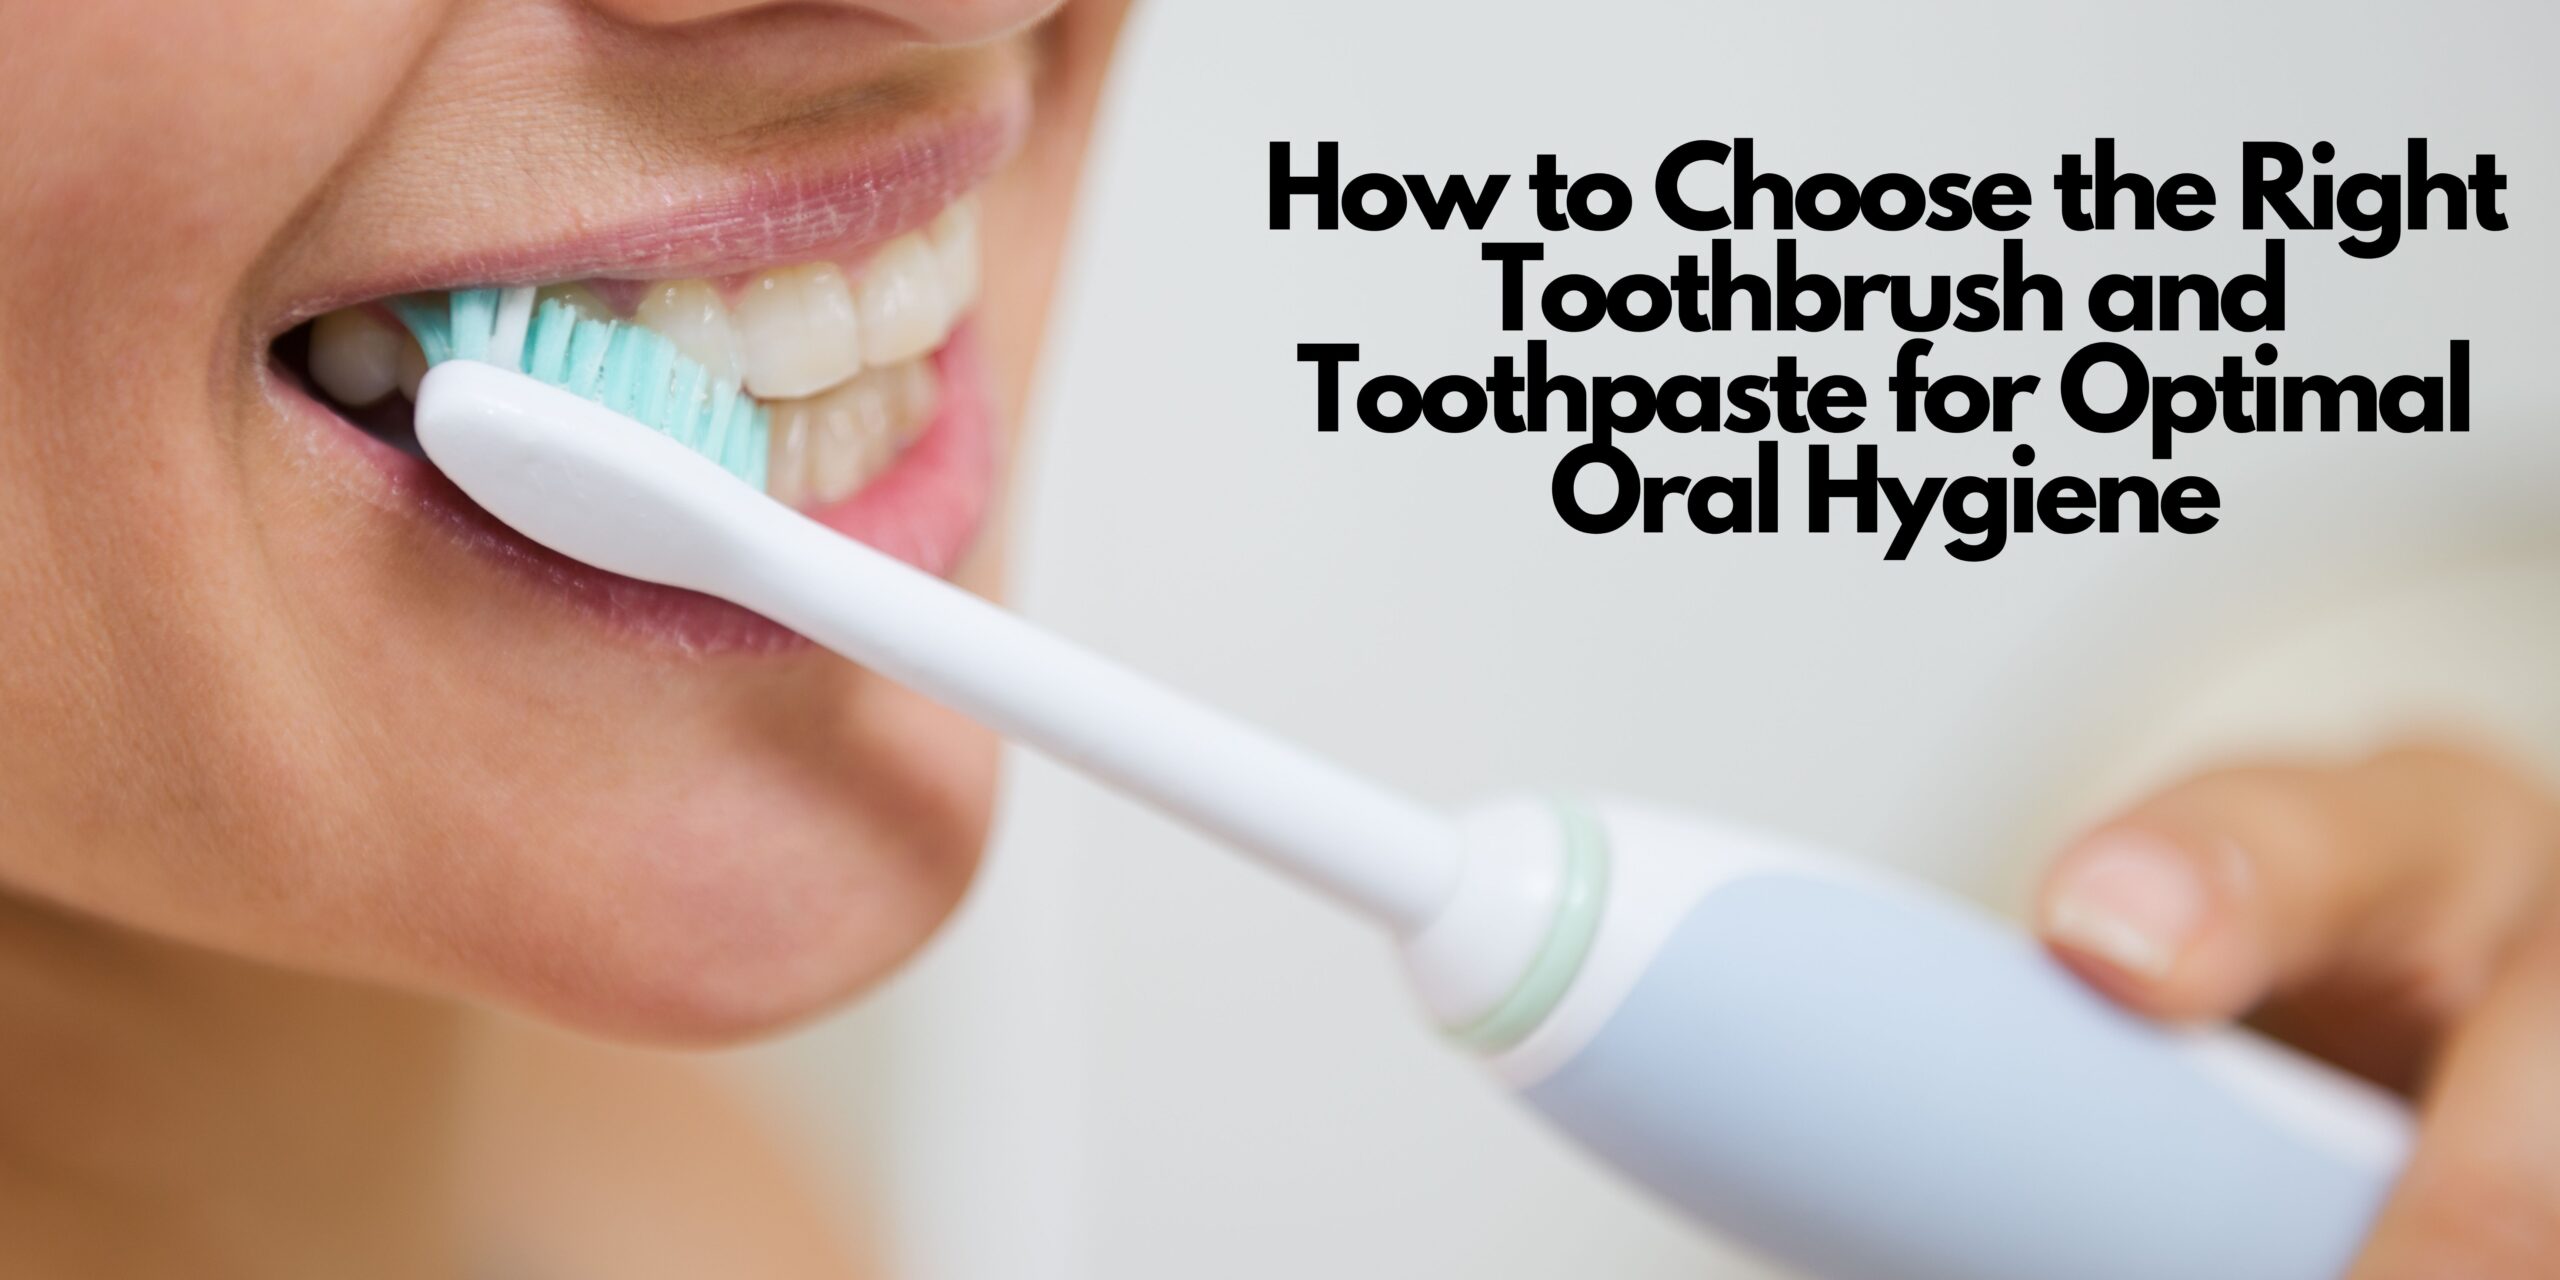 How to Choose the Right Toothbrush and Toothpaste for Optimal Oral Hygiene